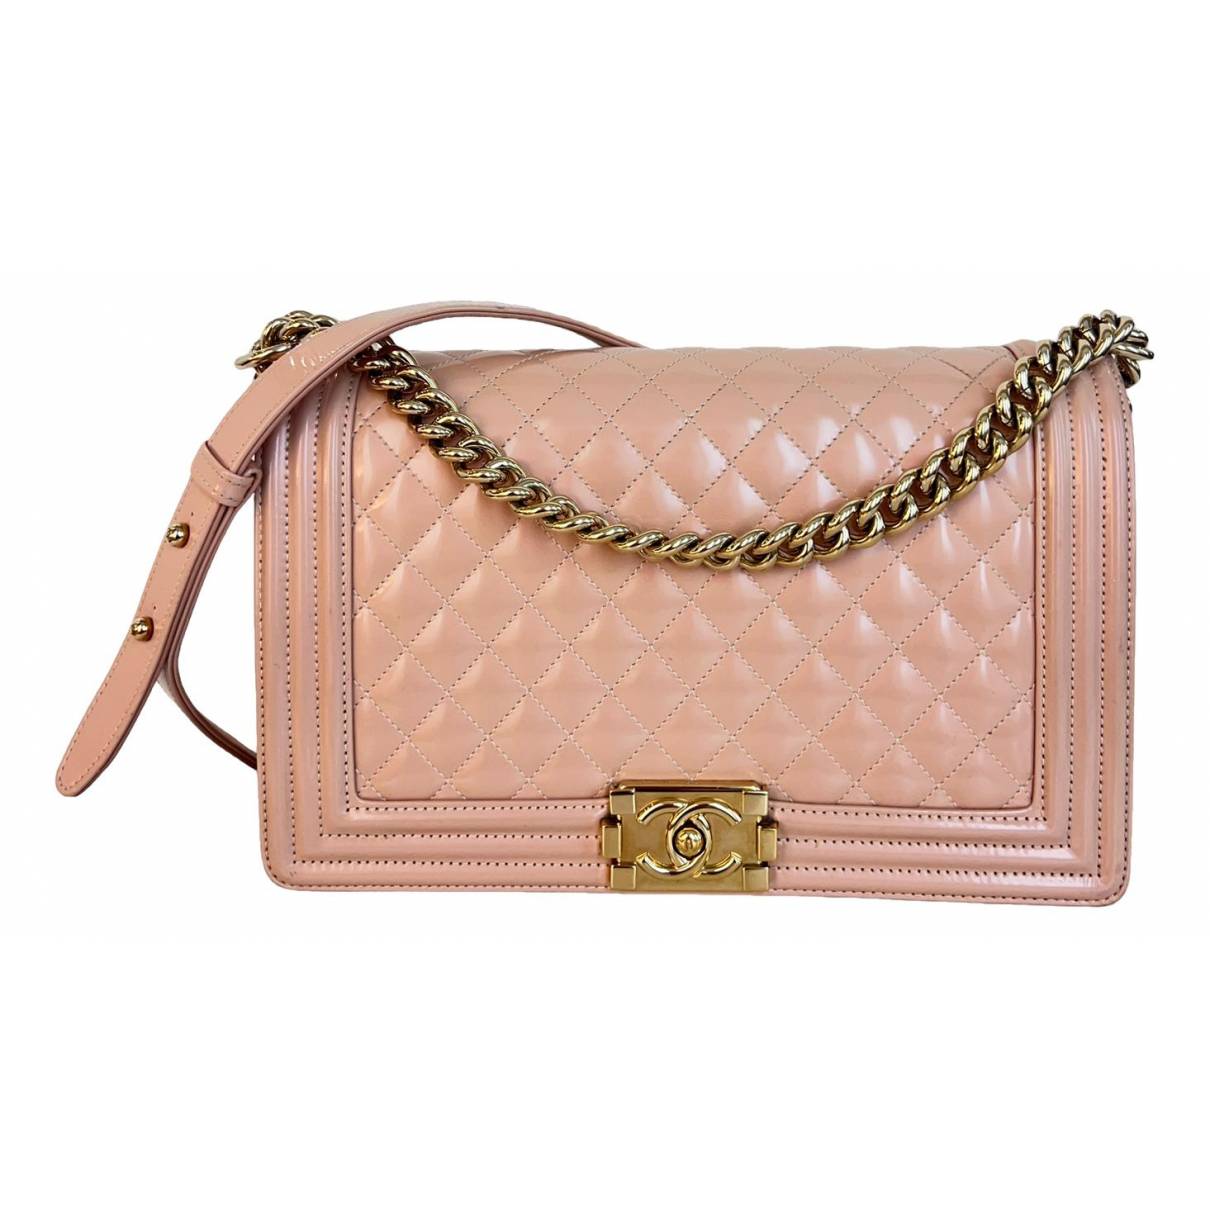 Boy patent leather handbag Chanel Pink in Patent leather - 35616795